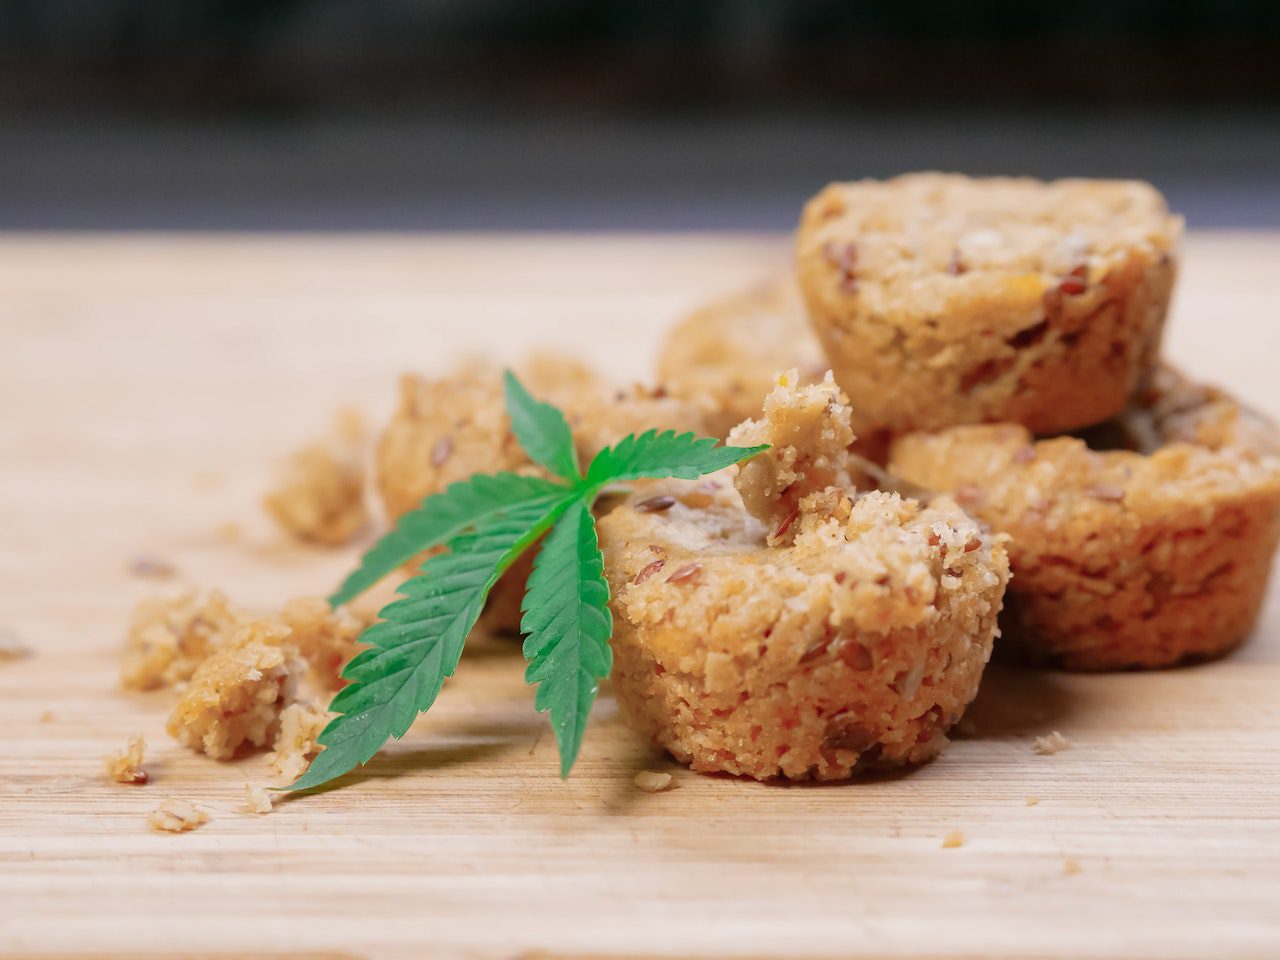 How To Make Edibles With Baked Weed In Canada?